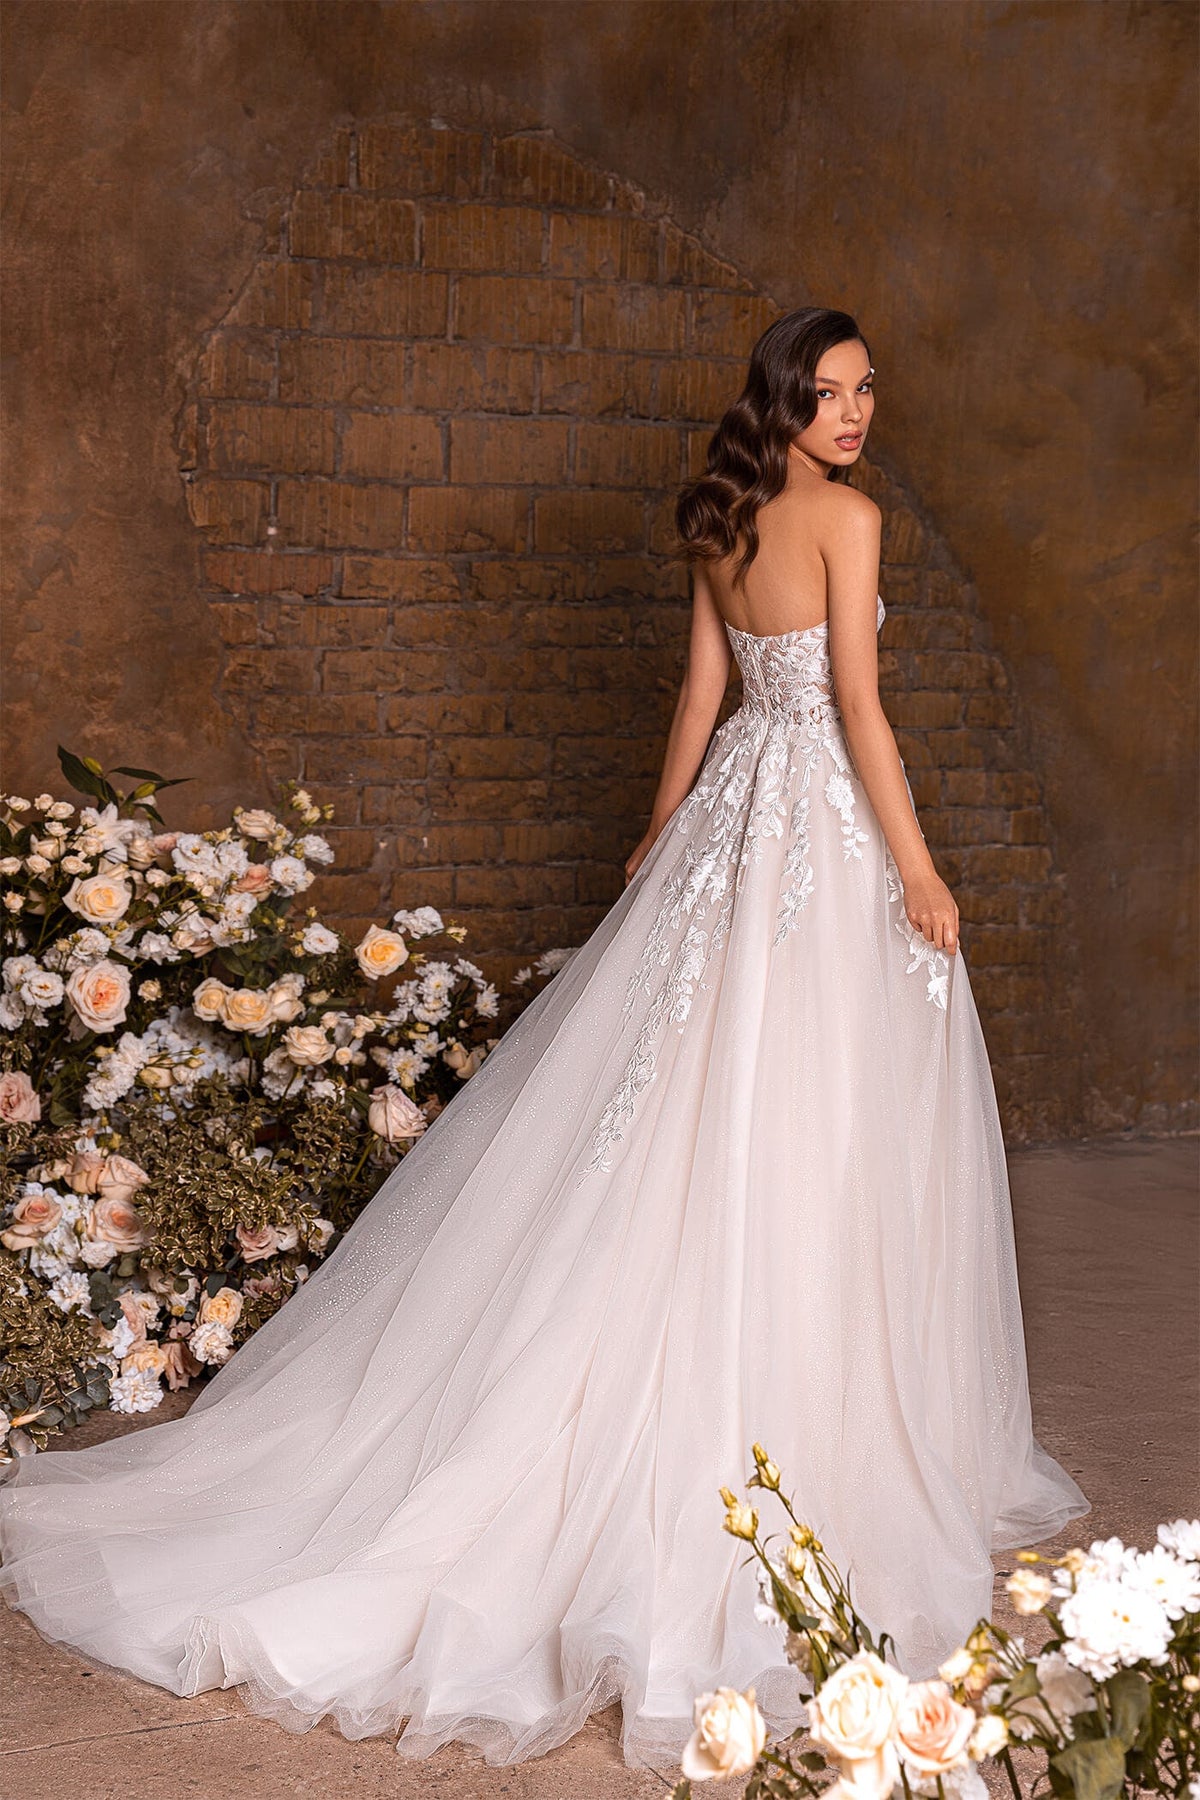 Beautiful Unique Aline Deep V Neckline Sleeveless Strapless Floral Lace Wedding Dress Bridal Gown with Train Open Back Romantic Design